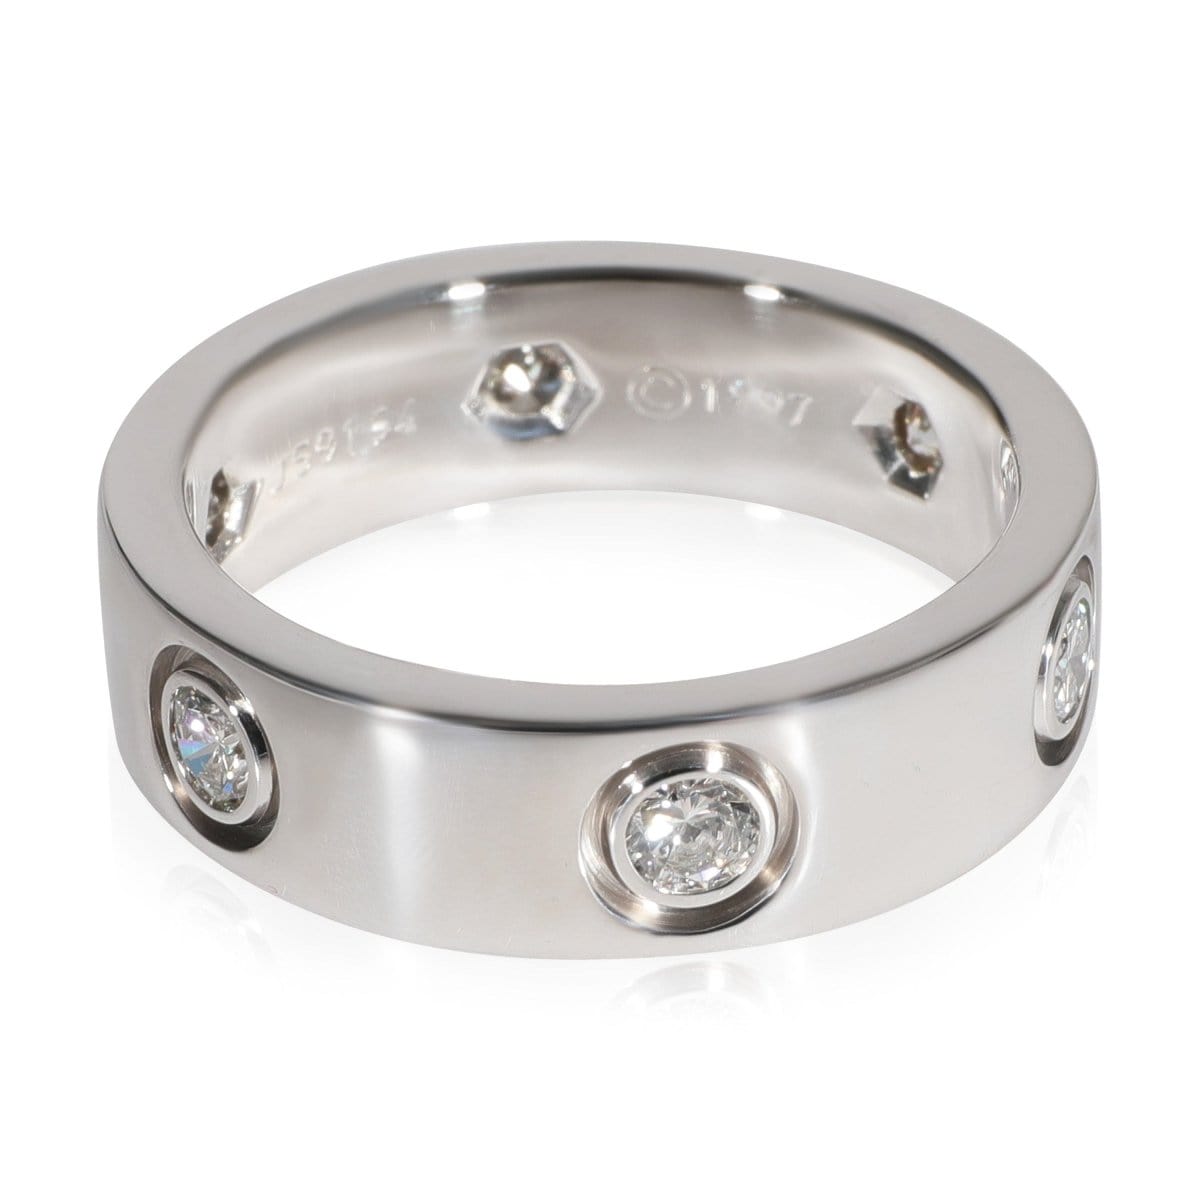 Cartier 122346, Cartier Love Diamond Ring in 18k White Gold 0.46 CTW, Size: 50